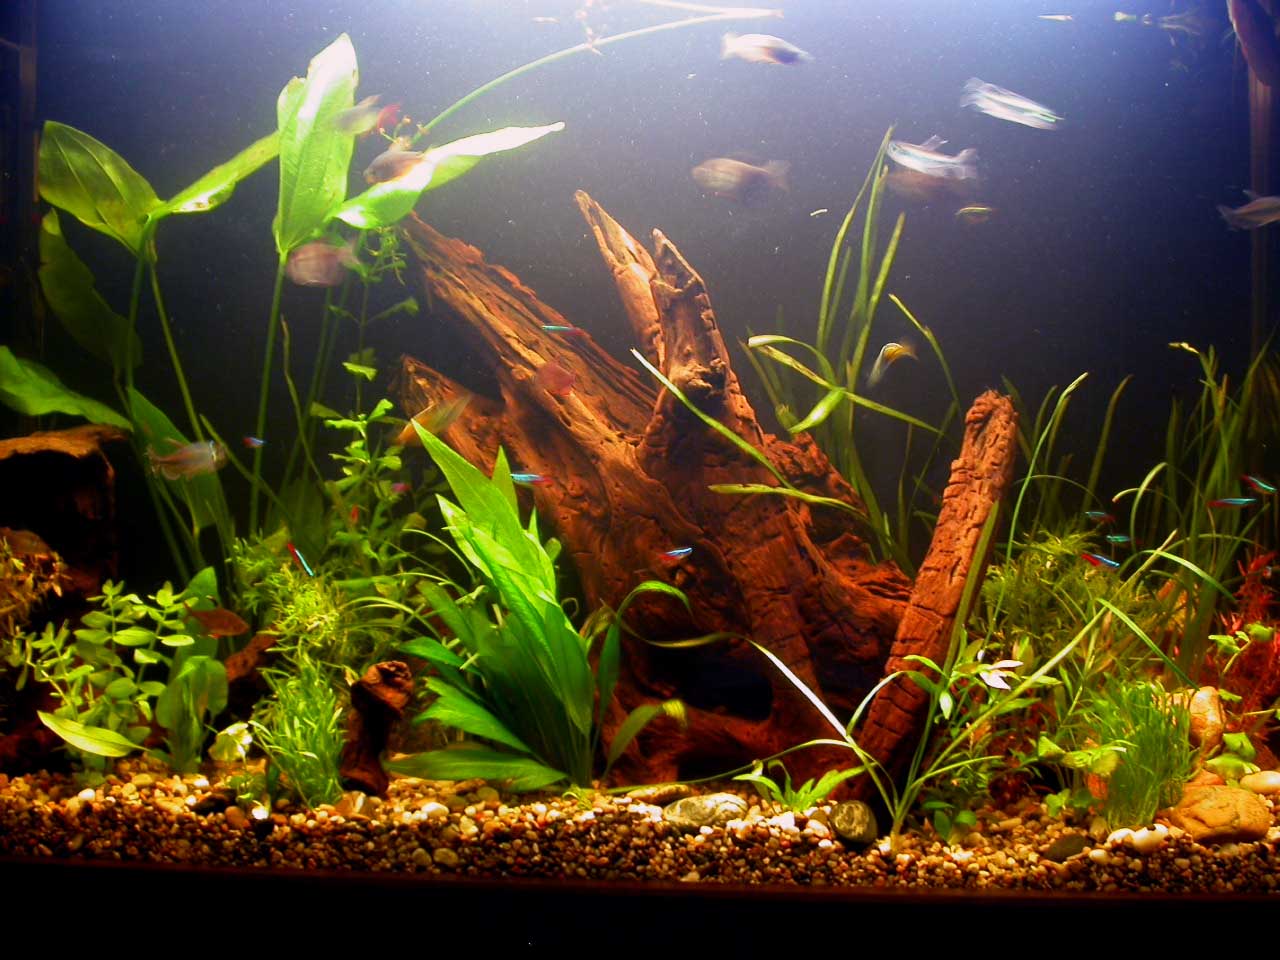 56 Gallon freshwater tank when it was first set up. It looks very different now, different plants and lots of 'em!